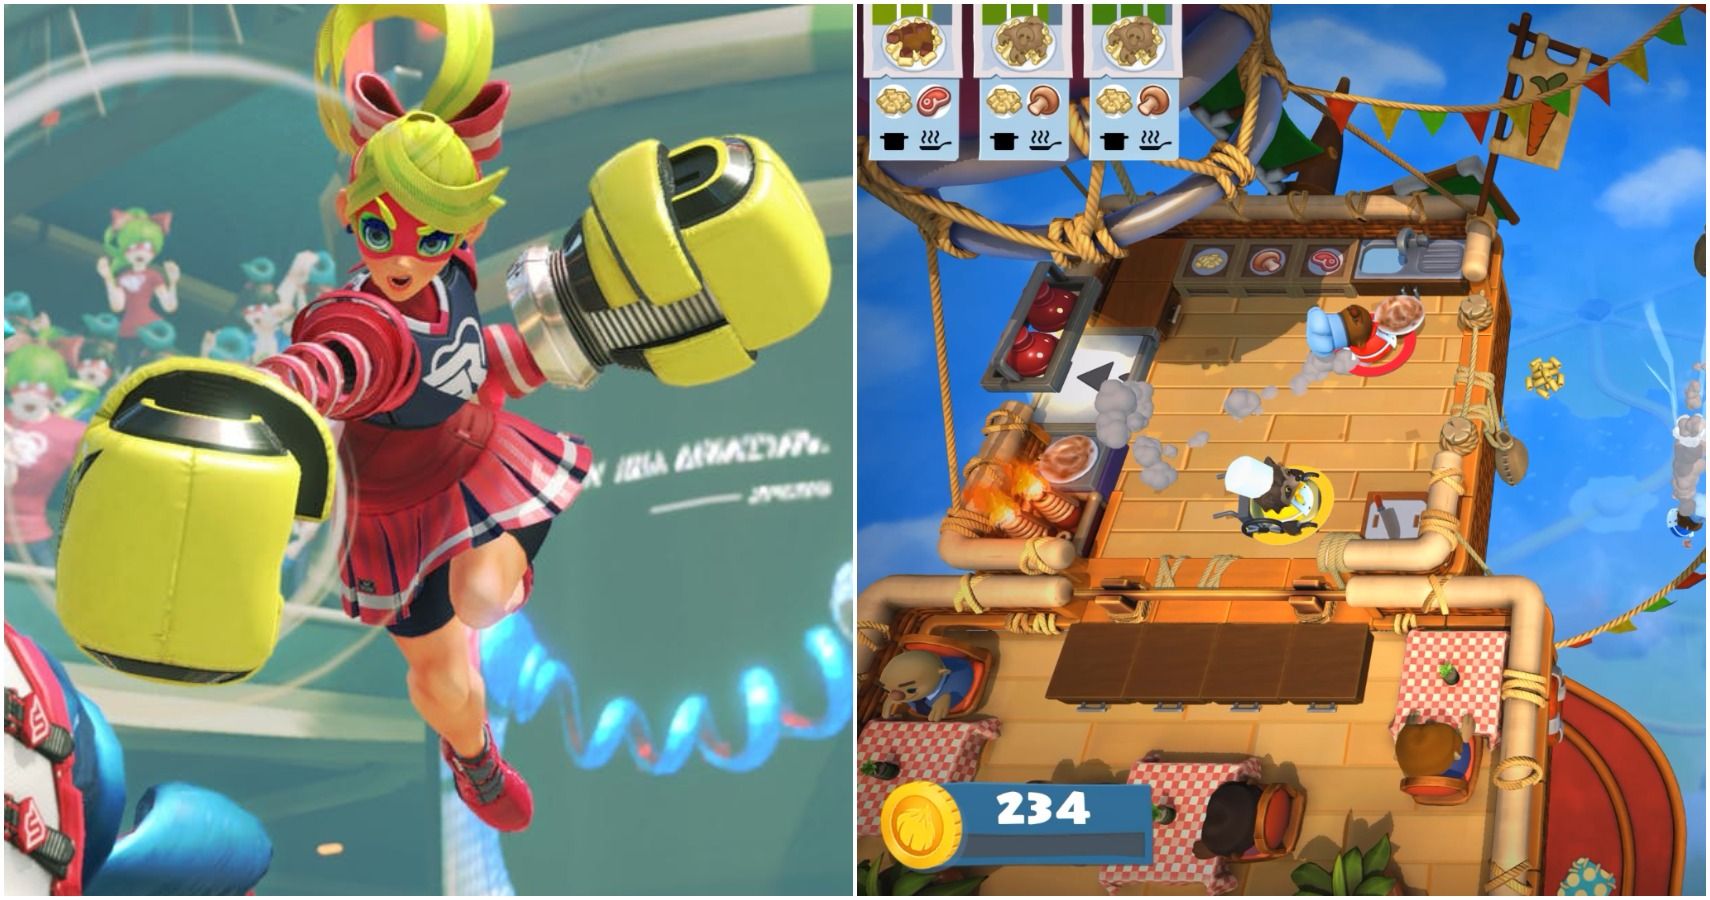 10 multiplayer games you can play with your friends and family